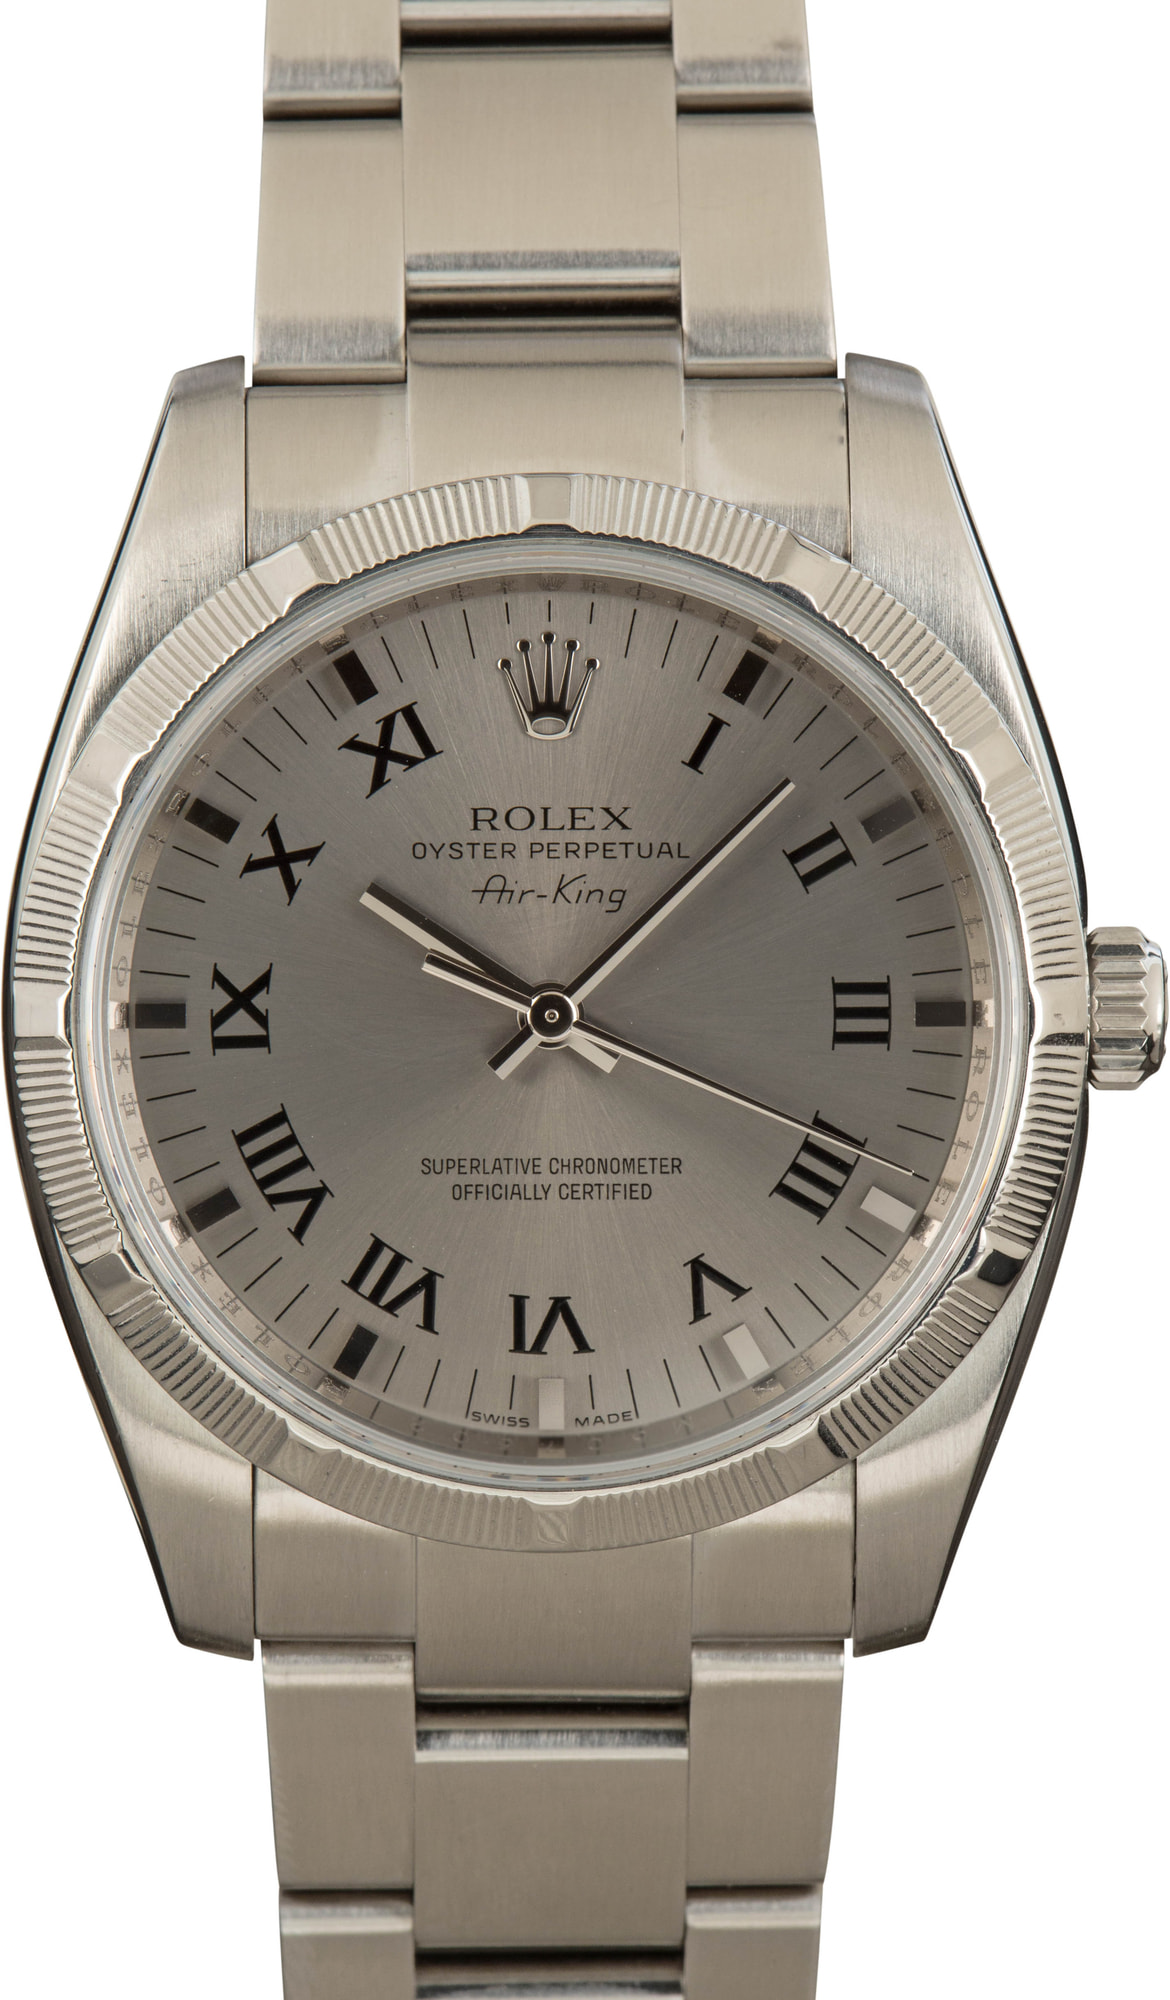 Rolex Air-King 114210 Watches - Bob's Watches